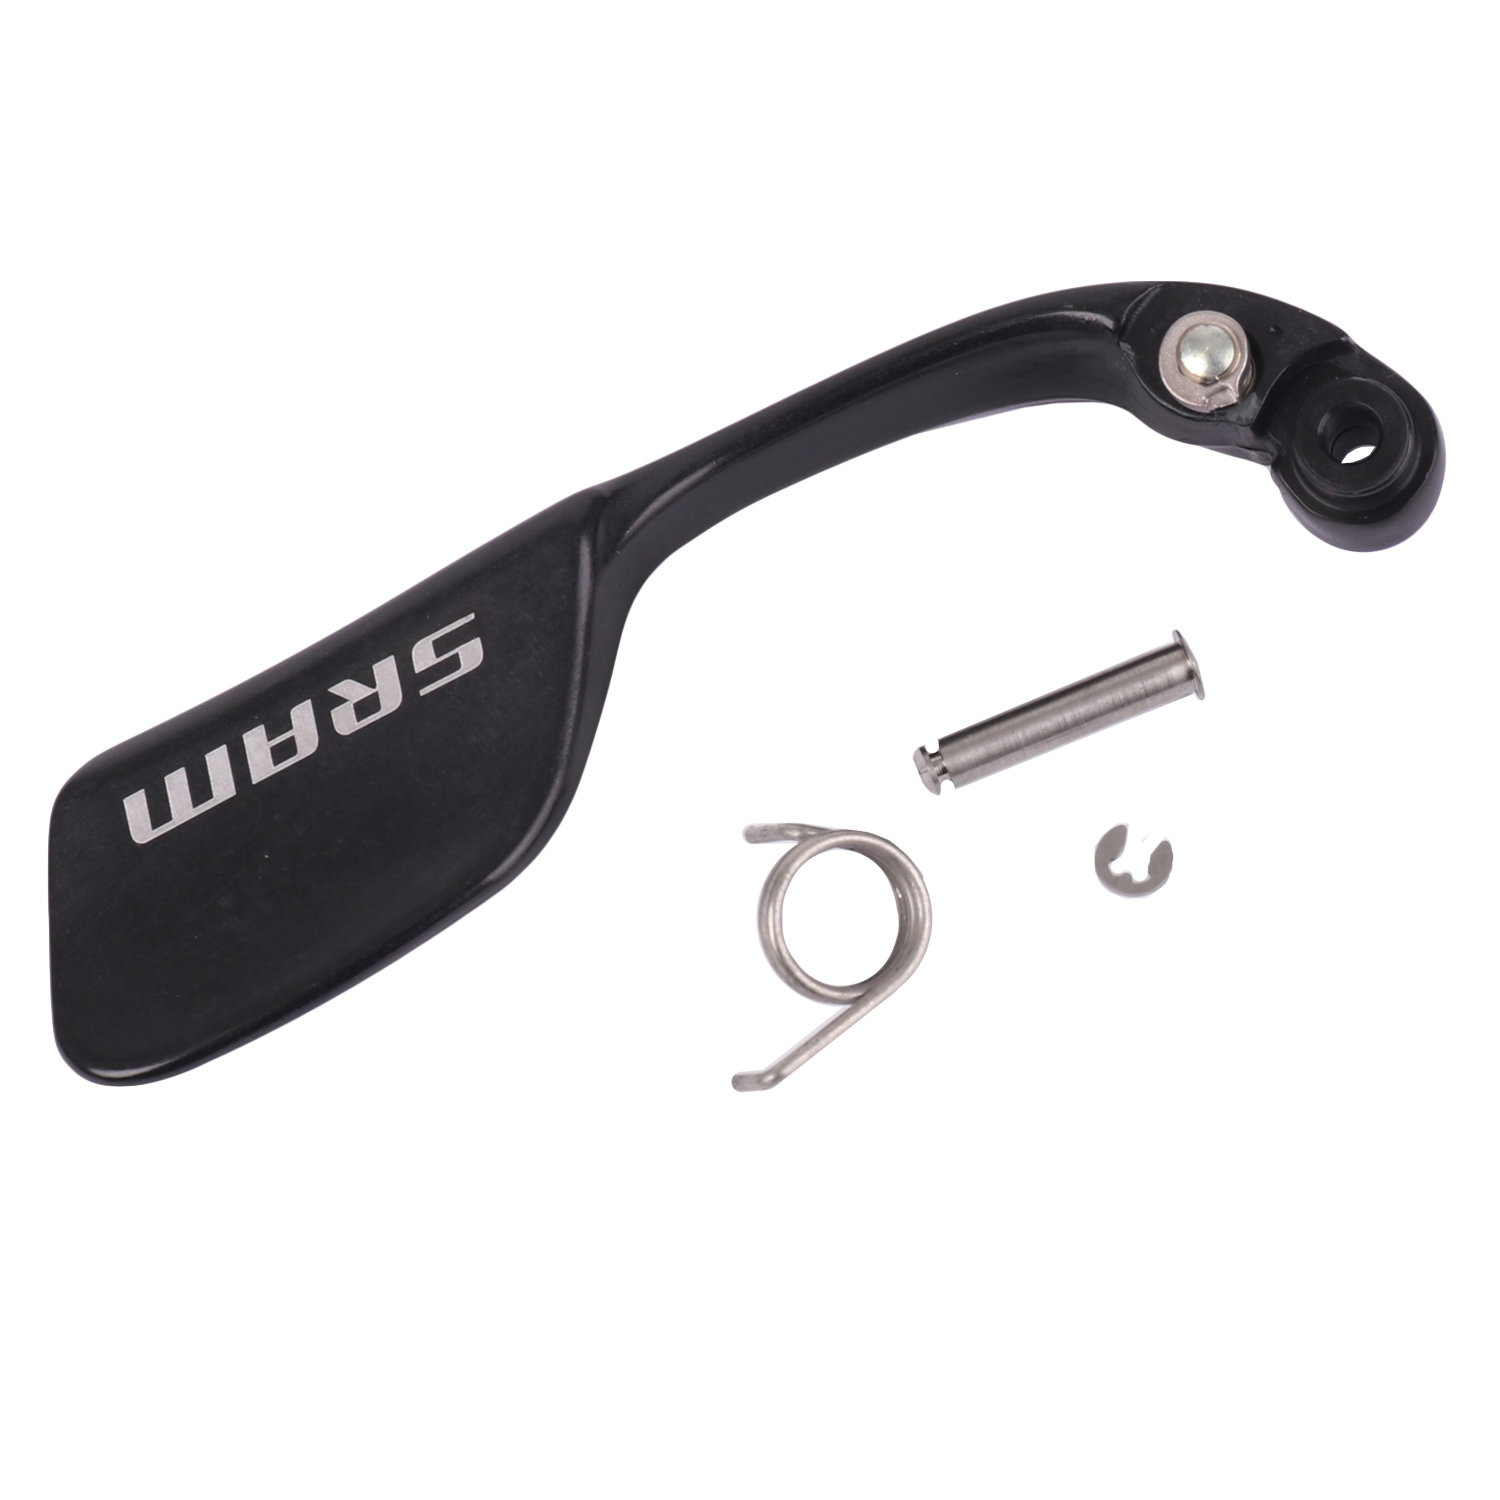 Image of SRAM APEX/RIVAL Shift Lever Assembly Kit - right - Model Year 2009-2011 - 11.7015.052.050